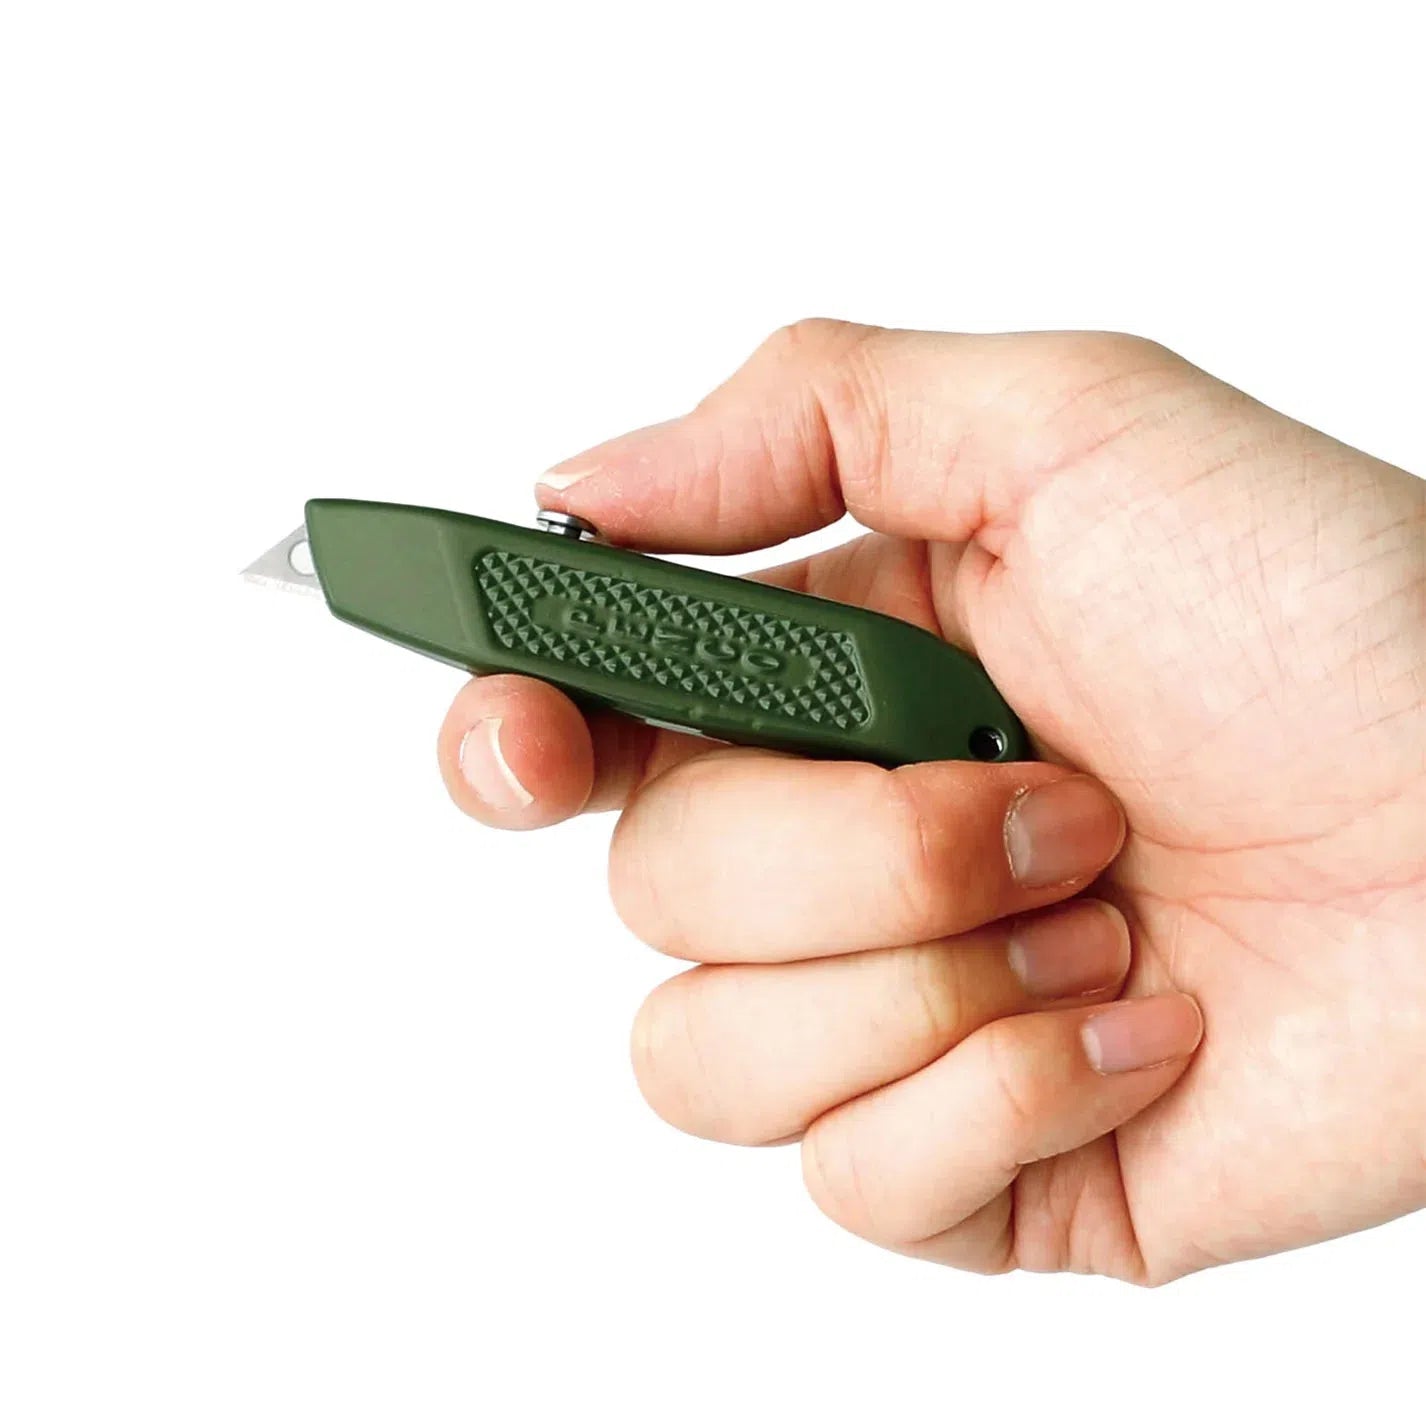 A PENCO Utility Knife - Khaki with a chain attached to it.